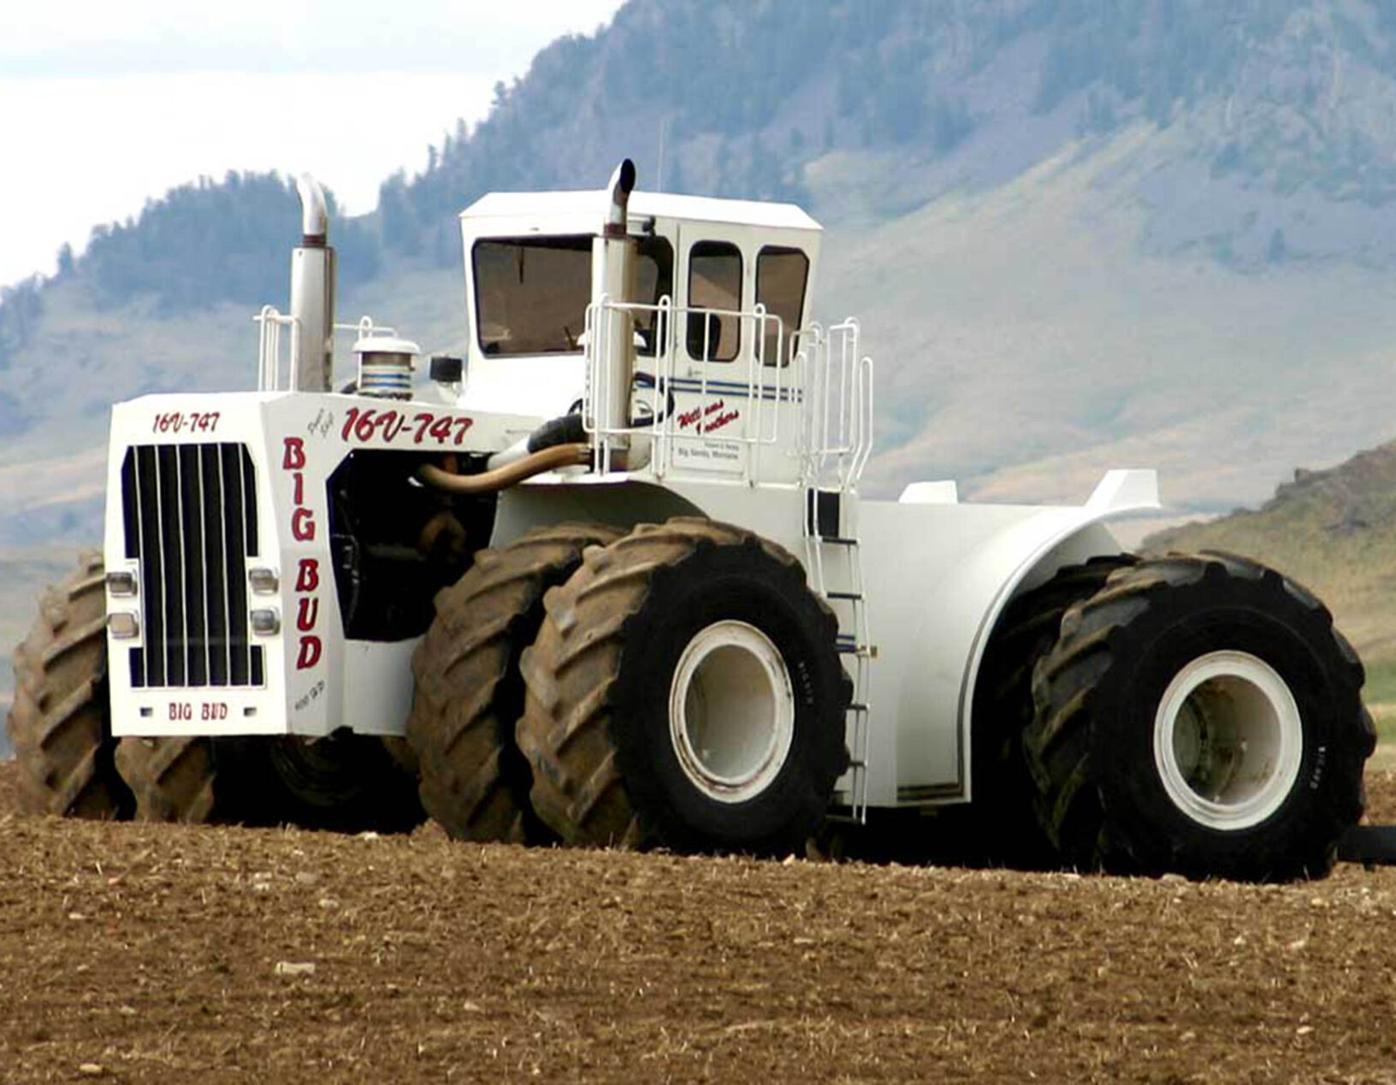 Meet Big Bud, the world's largest tractor | News | atchisonglobenow.com